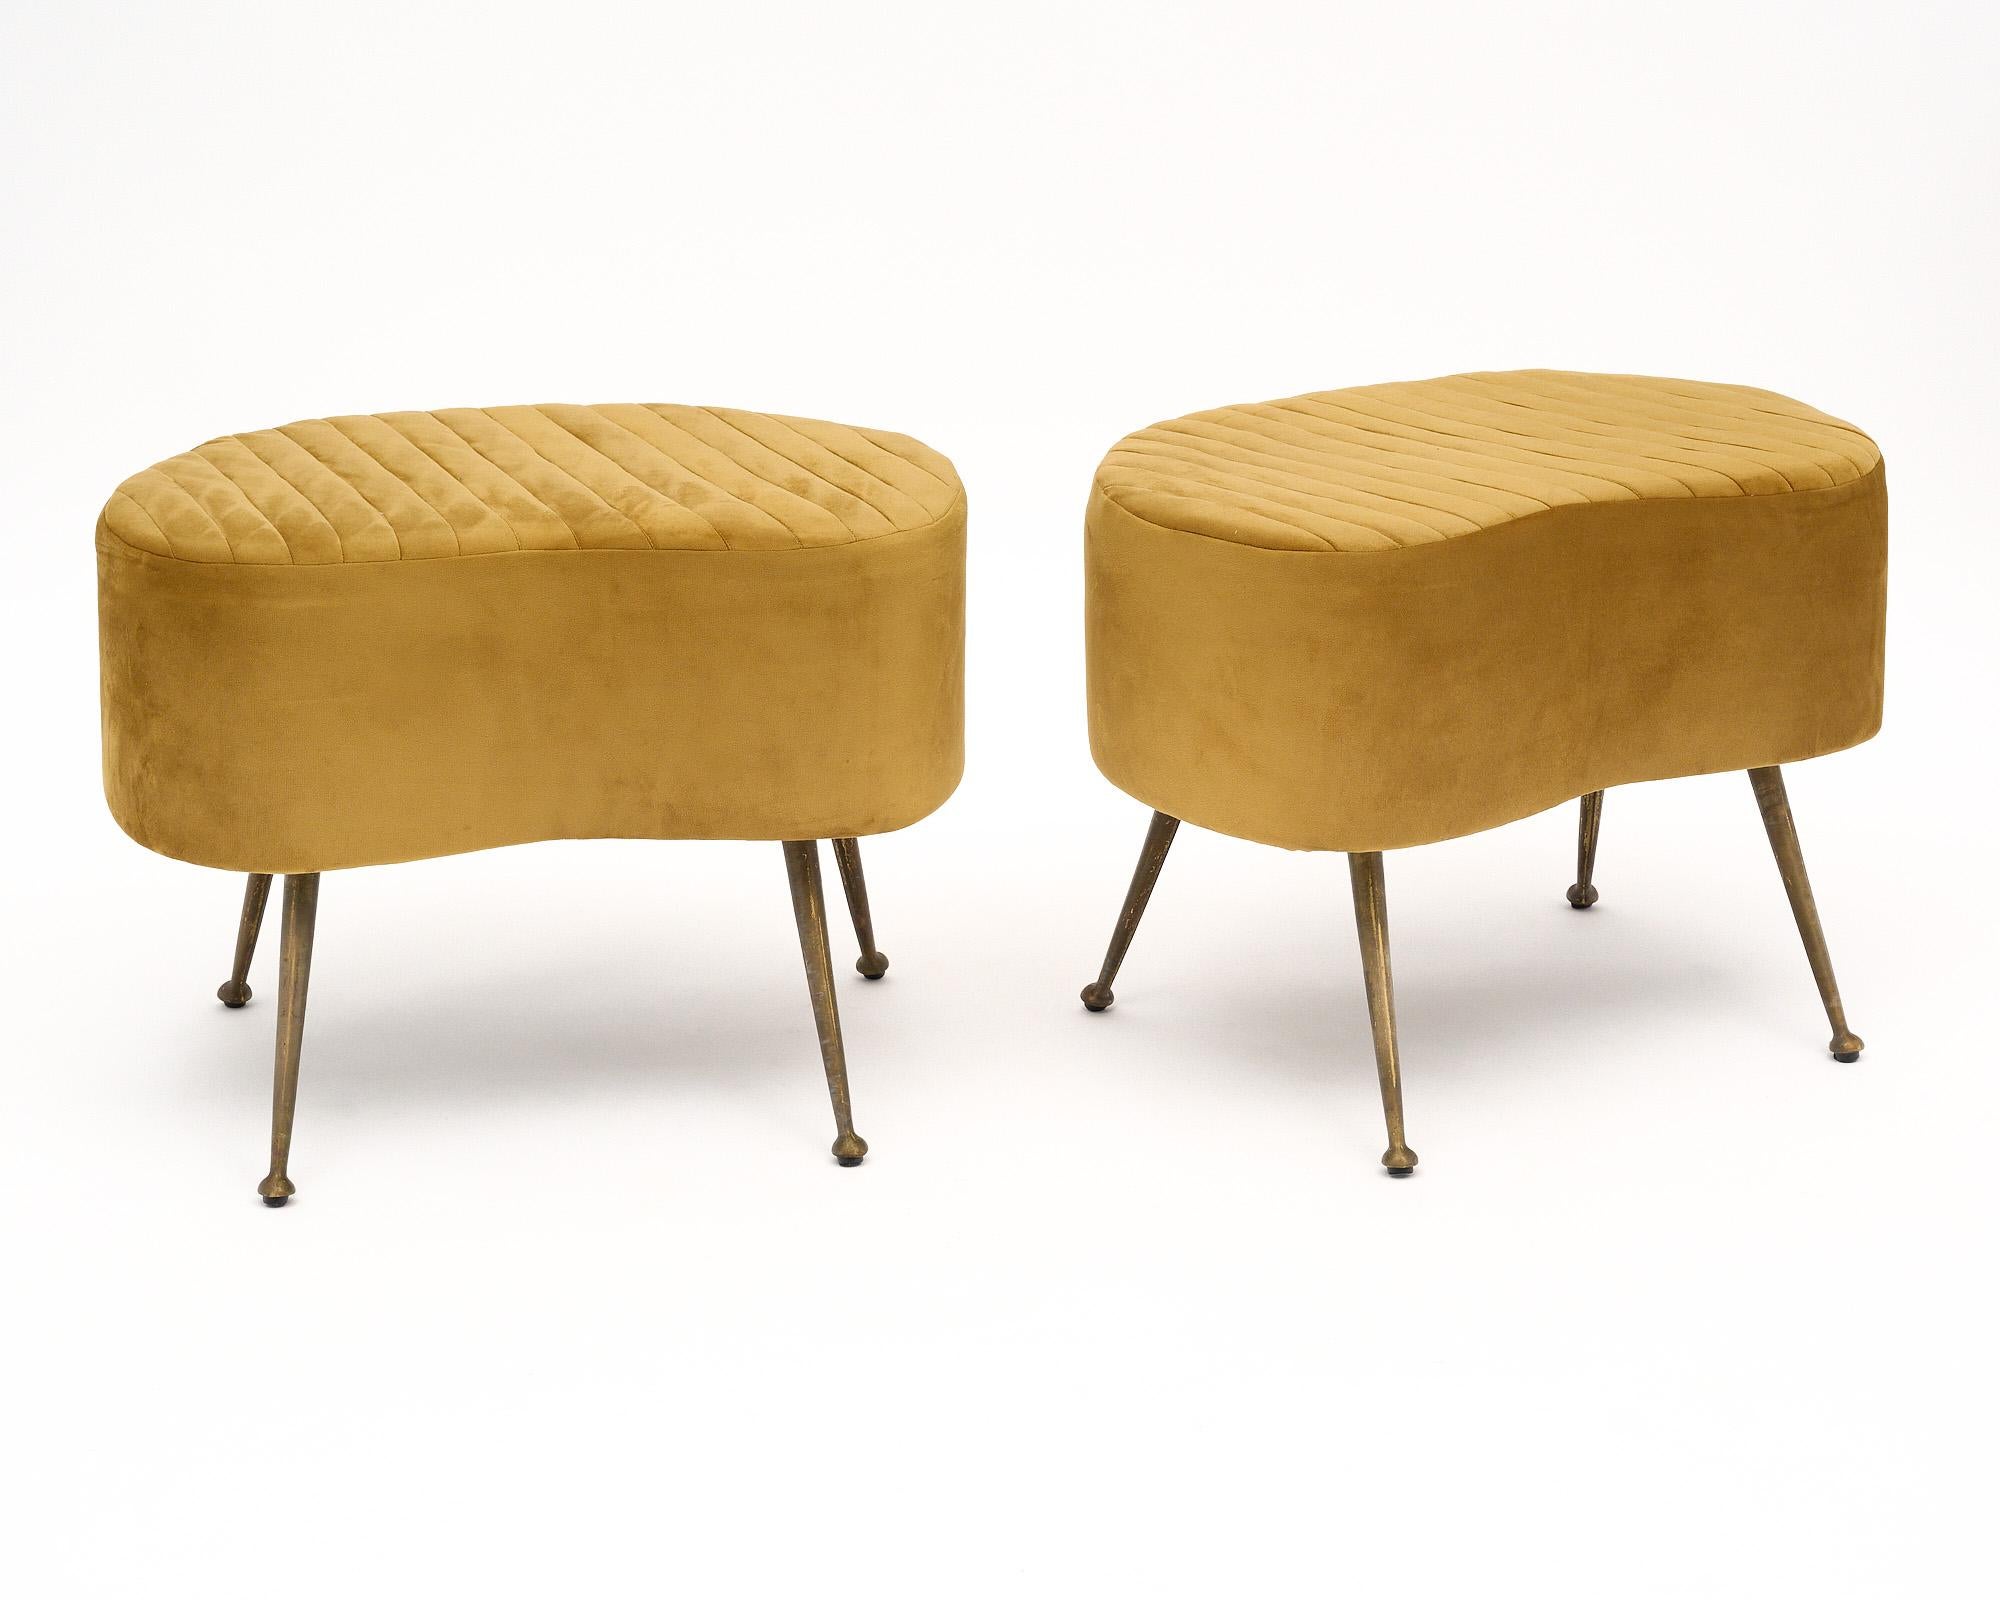 Pair of Italian vintage benches with flaring brass legs. We love the unique and striking curved shape of the seats and the quintessential Italian mid-century details. They have been newly upholstered in a gold mico fiber fabric with a quilted top.
